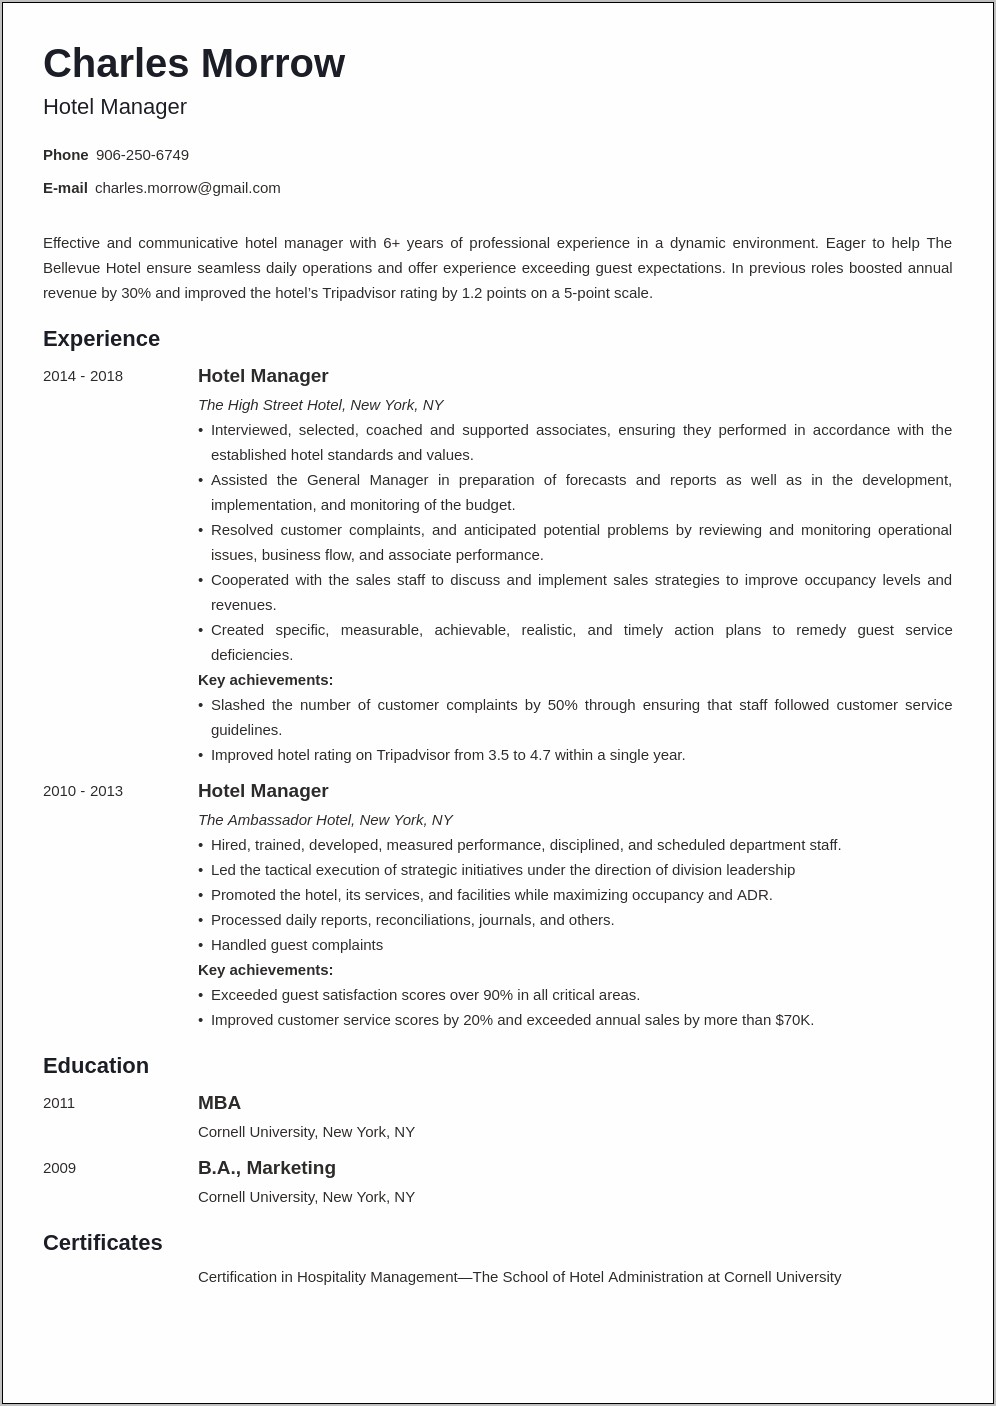 Resume Templates For Hospitality Management